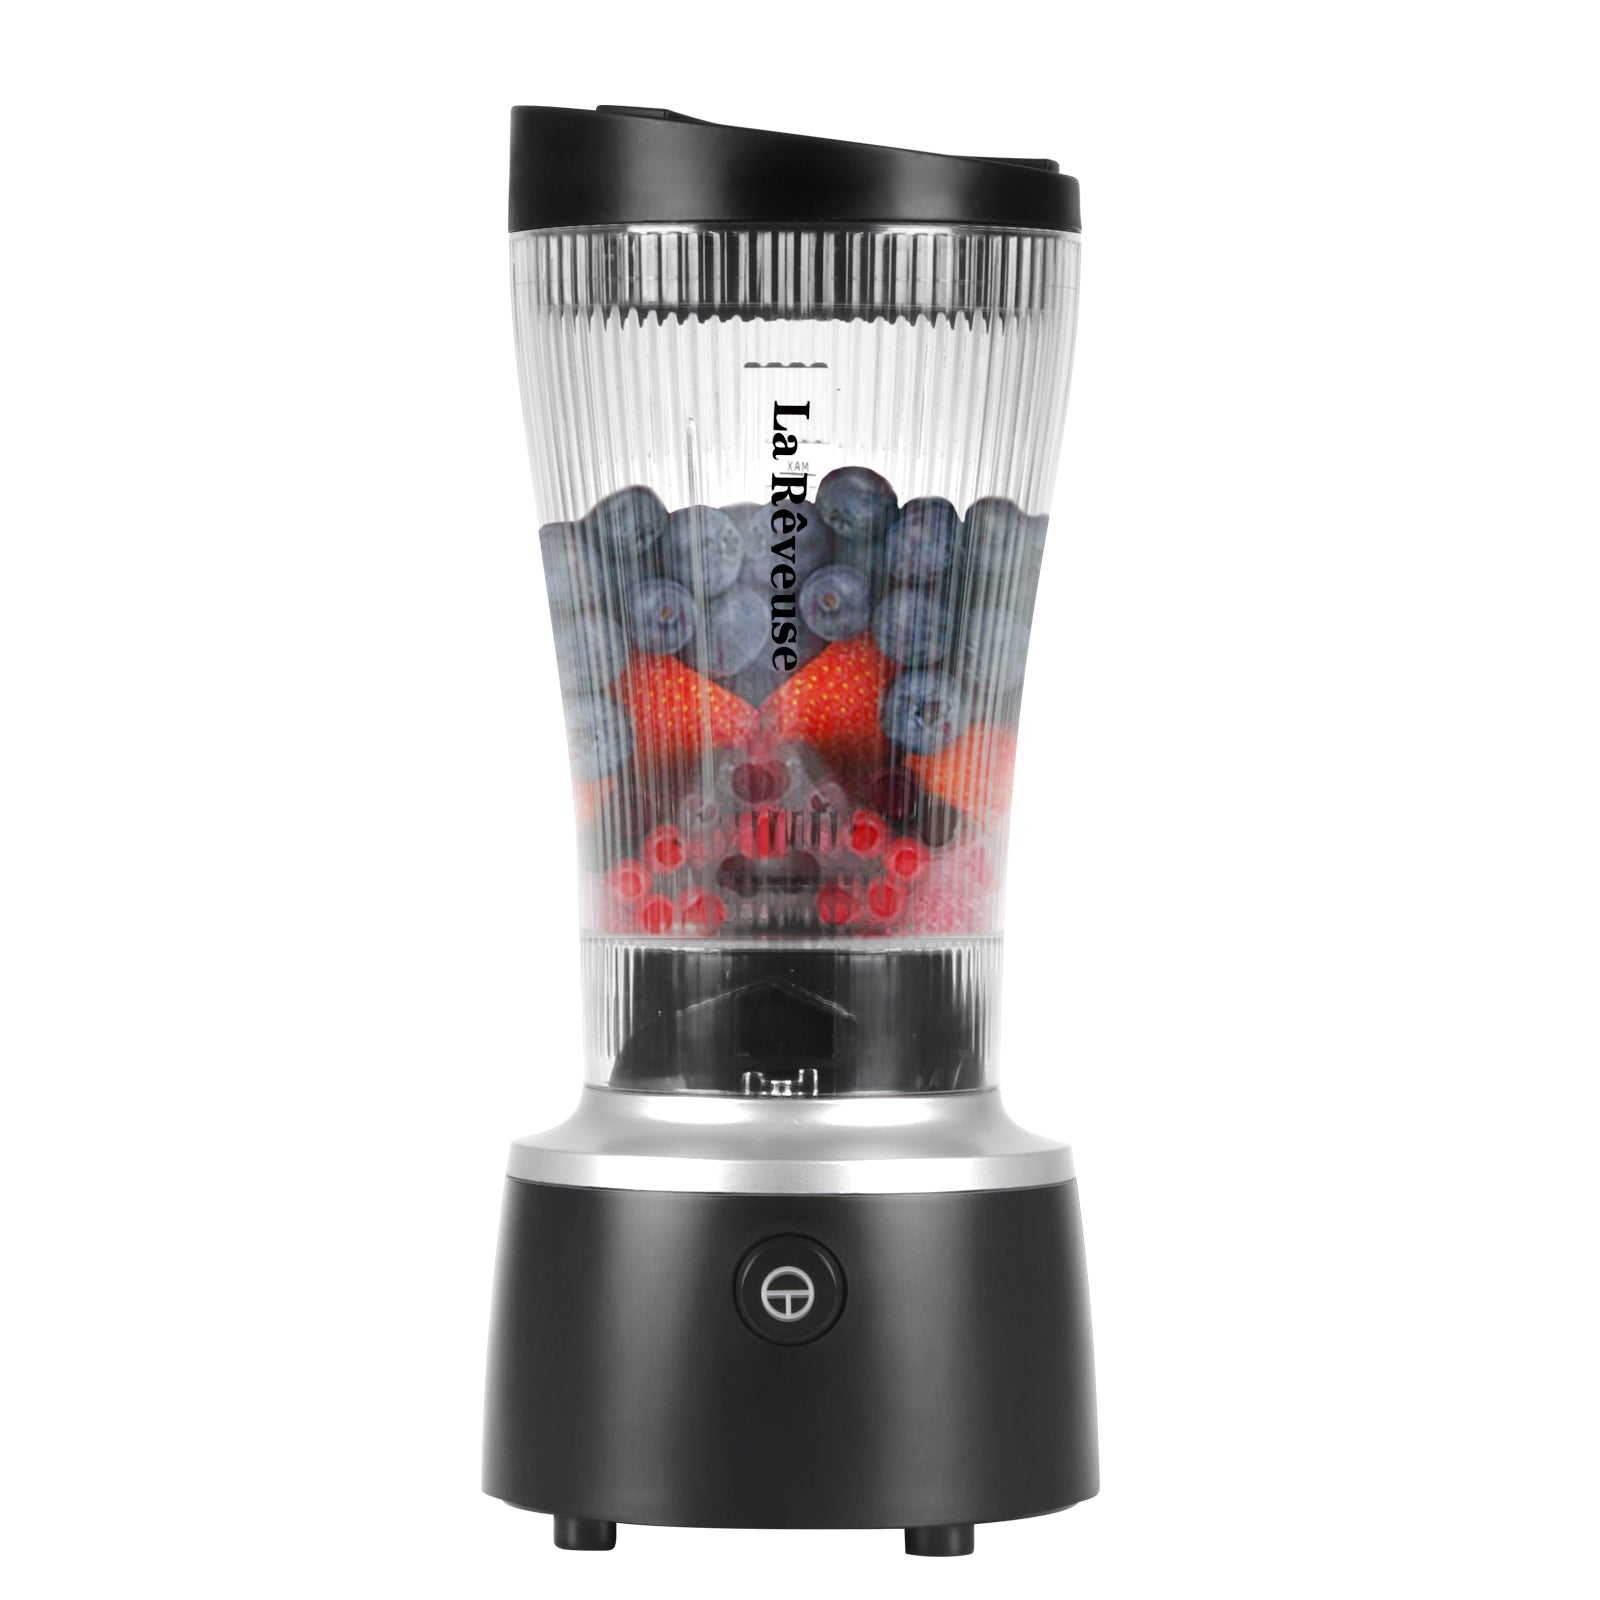 La Reveuse Personal Size Blender 250 Watts Power for Shakes Smoothies Seasonings Sauces with 1 Piece 15 oz Cup,1 Piece 10 oz Mug